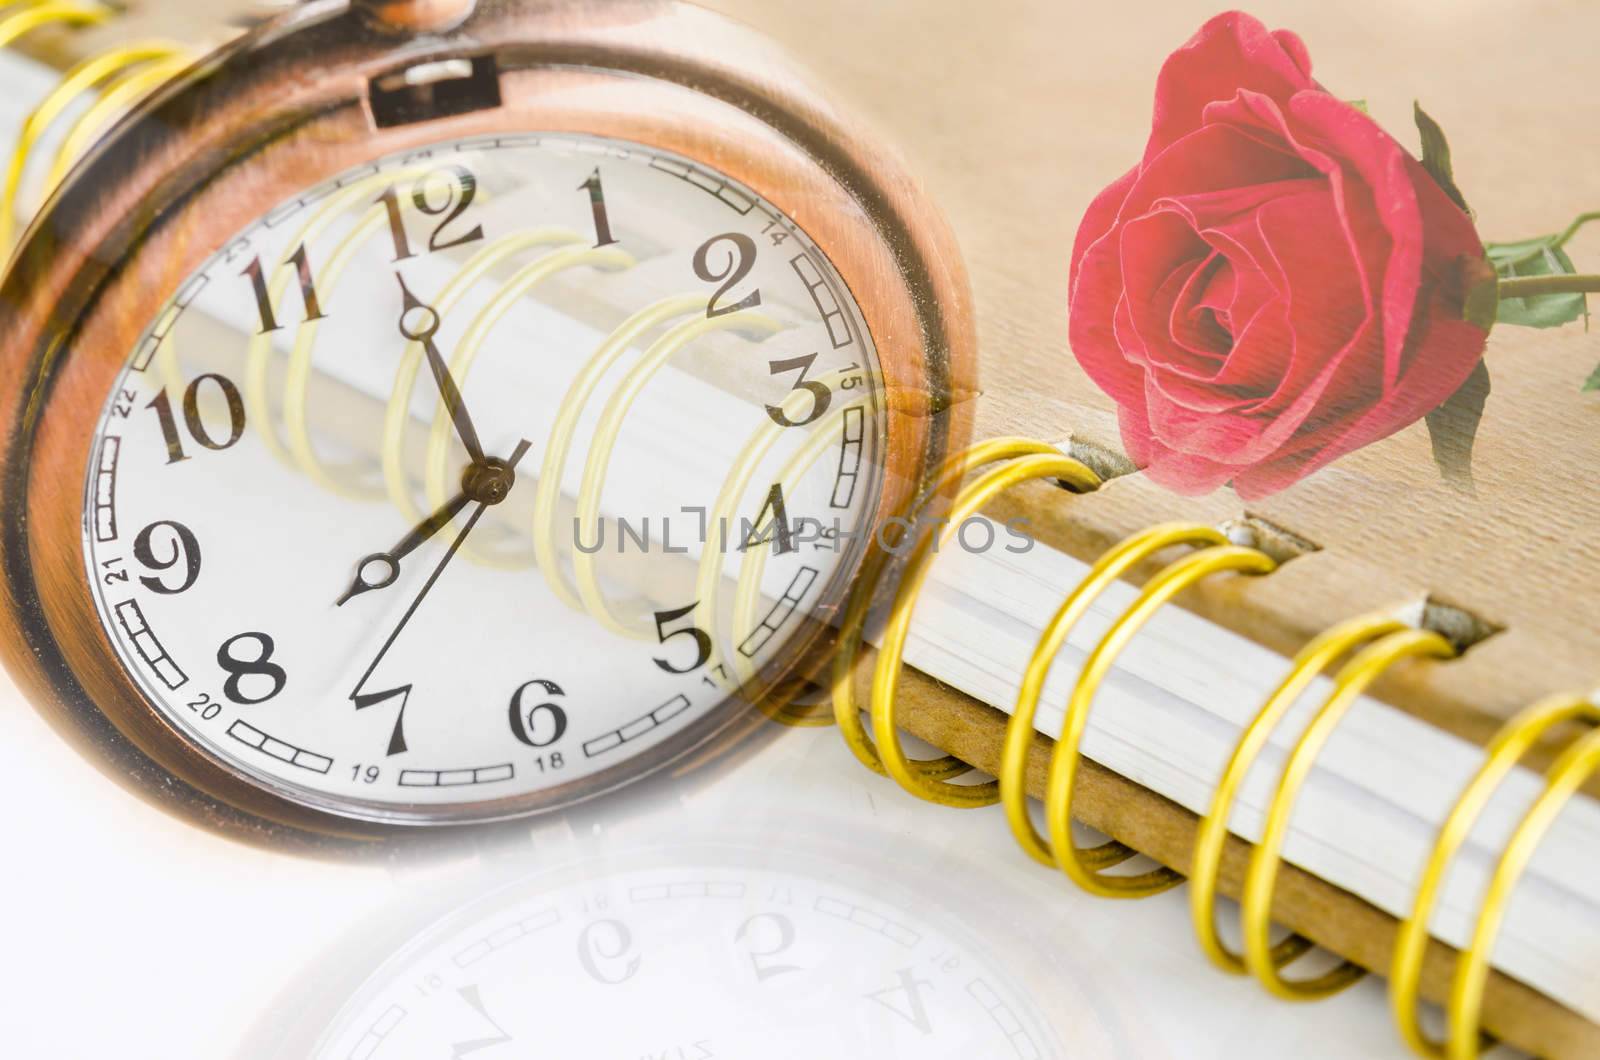 Red Rose and a pocket watch with diary on white background.